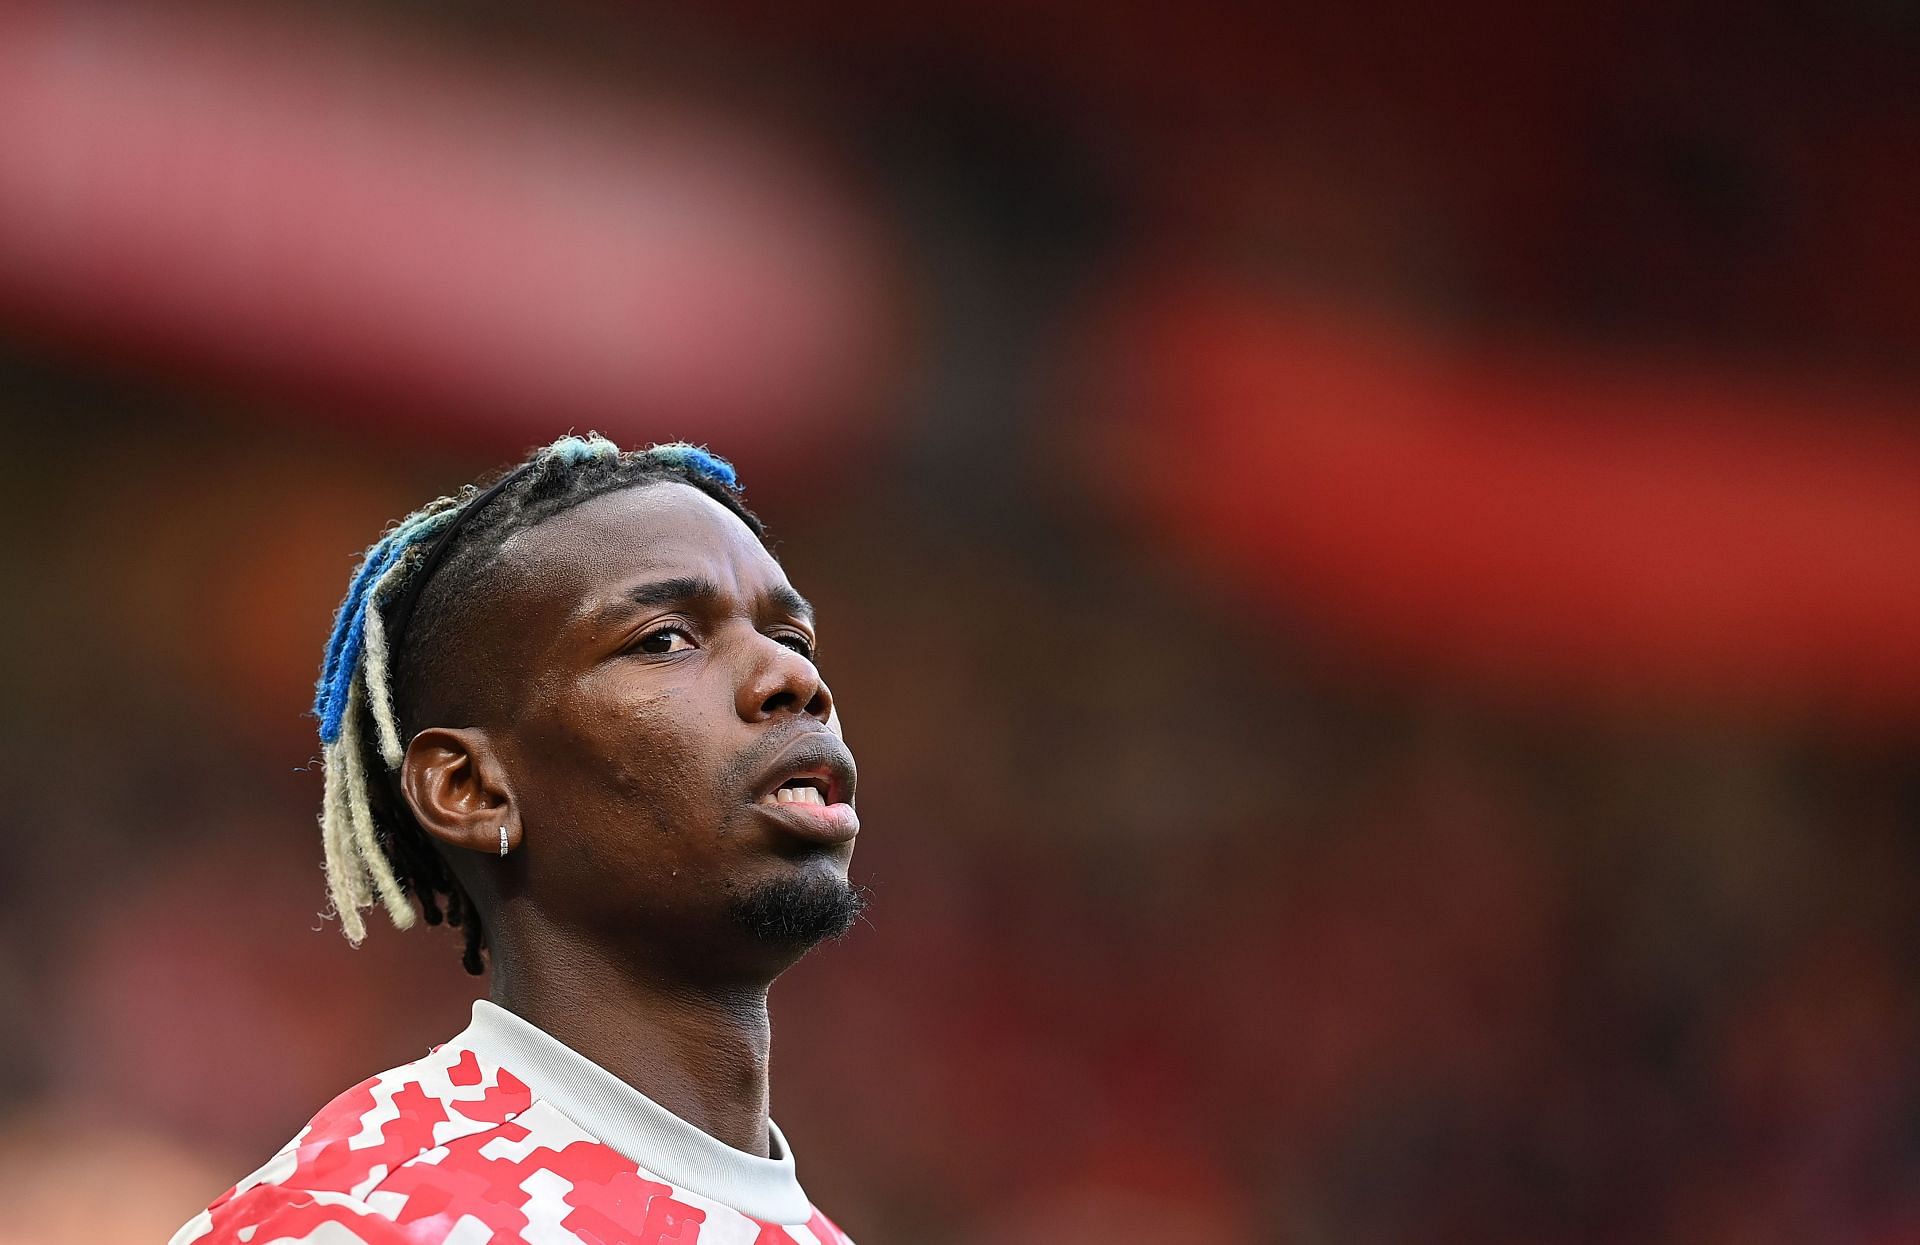 Juventus have ended their pursuit of Paul Pogba, who won four Serie A titles.